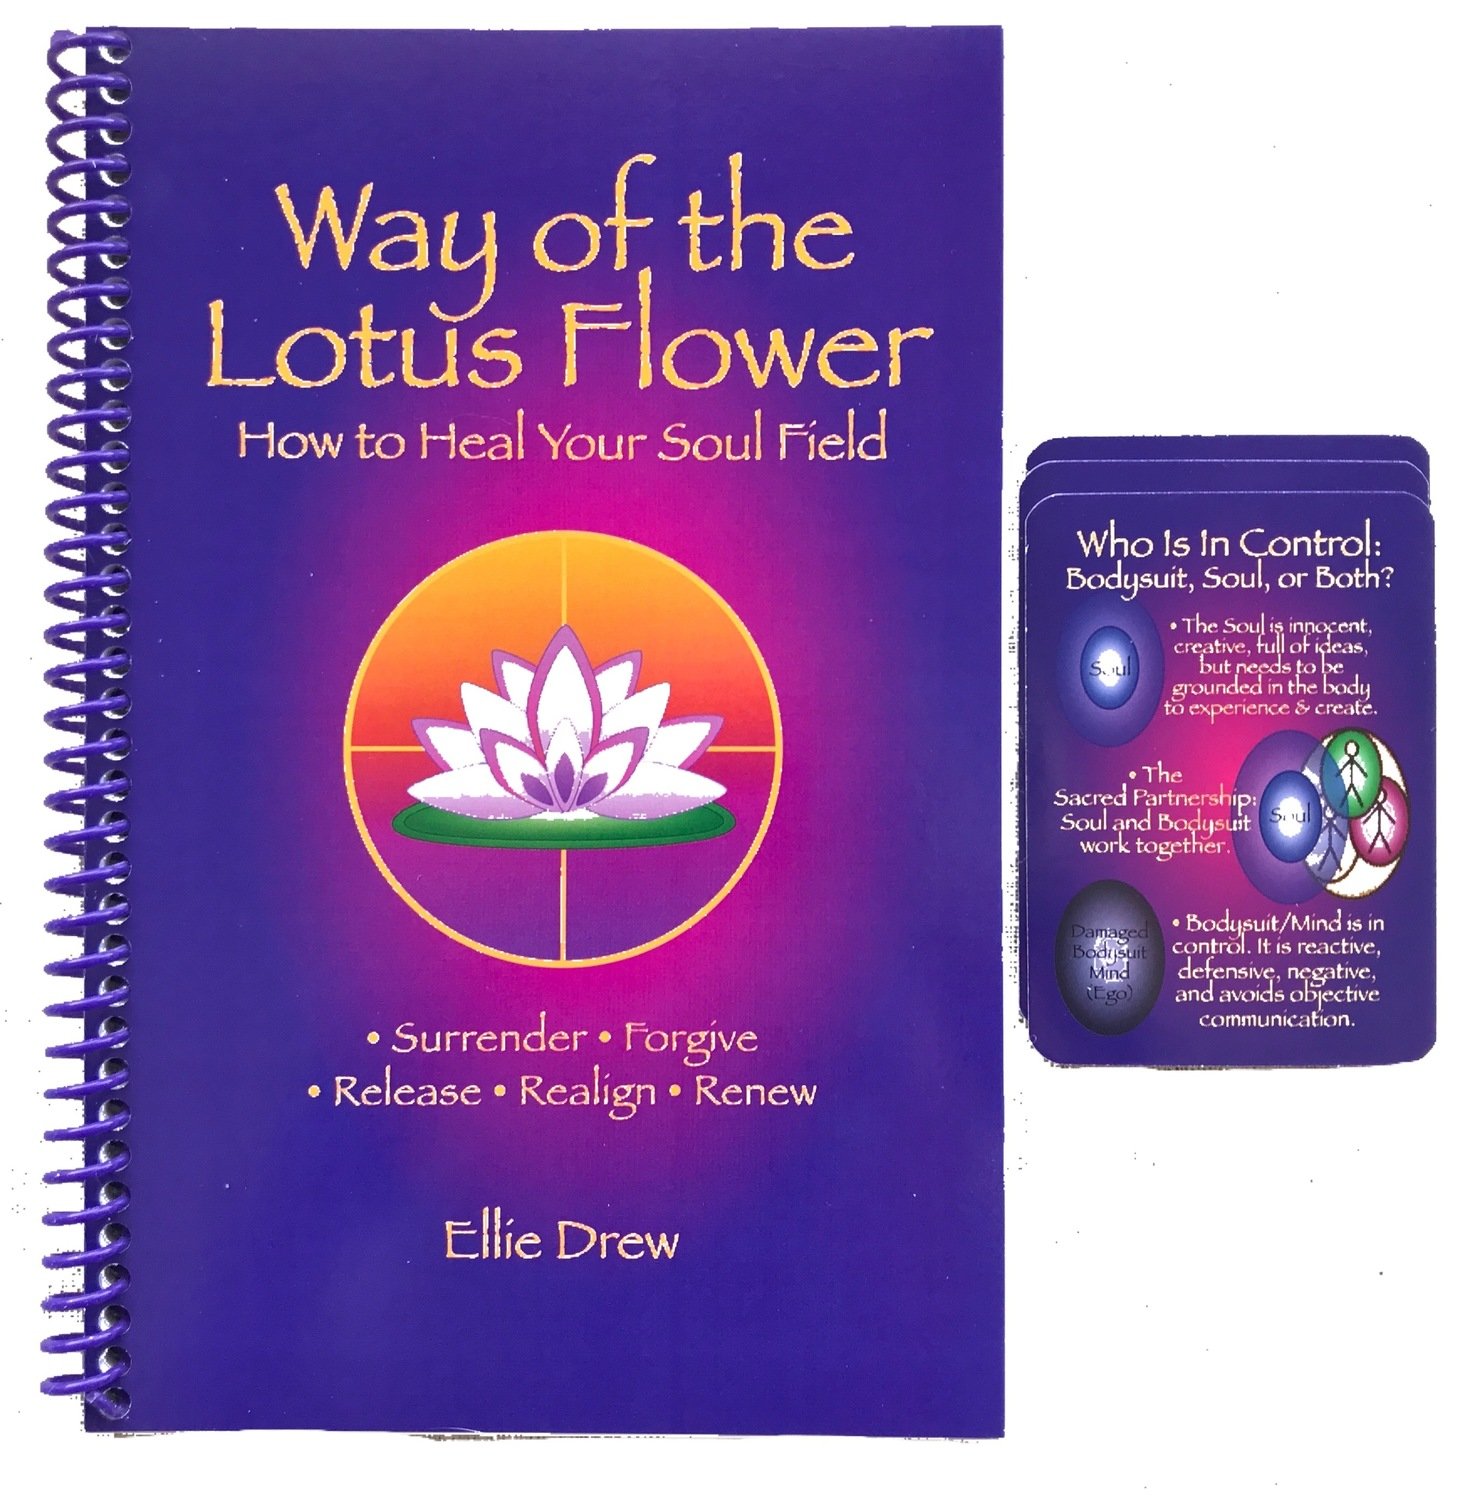 The Way of the Lotus Flower.  How to Heal Your Soul Field.